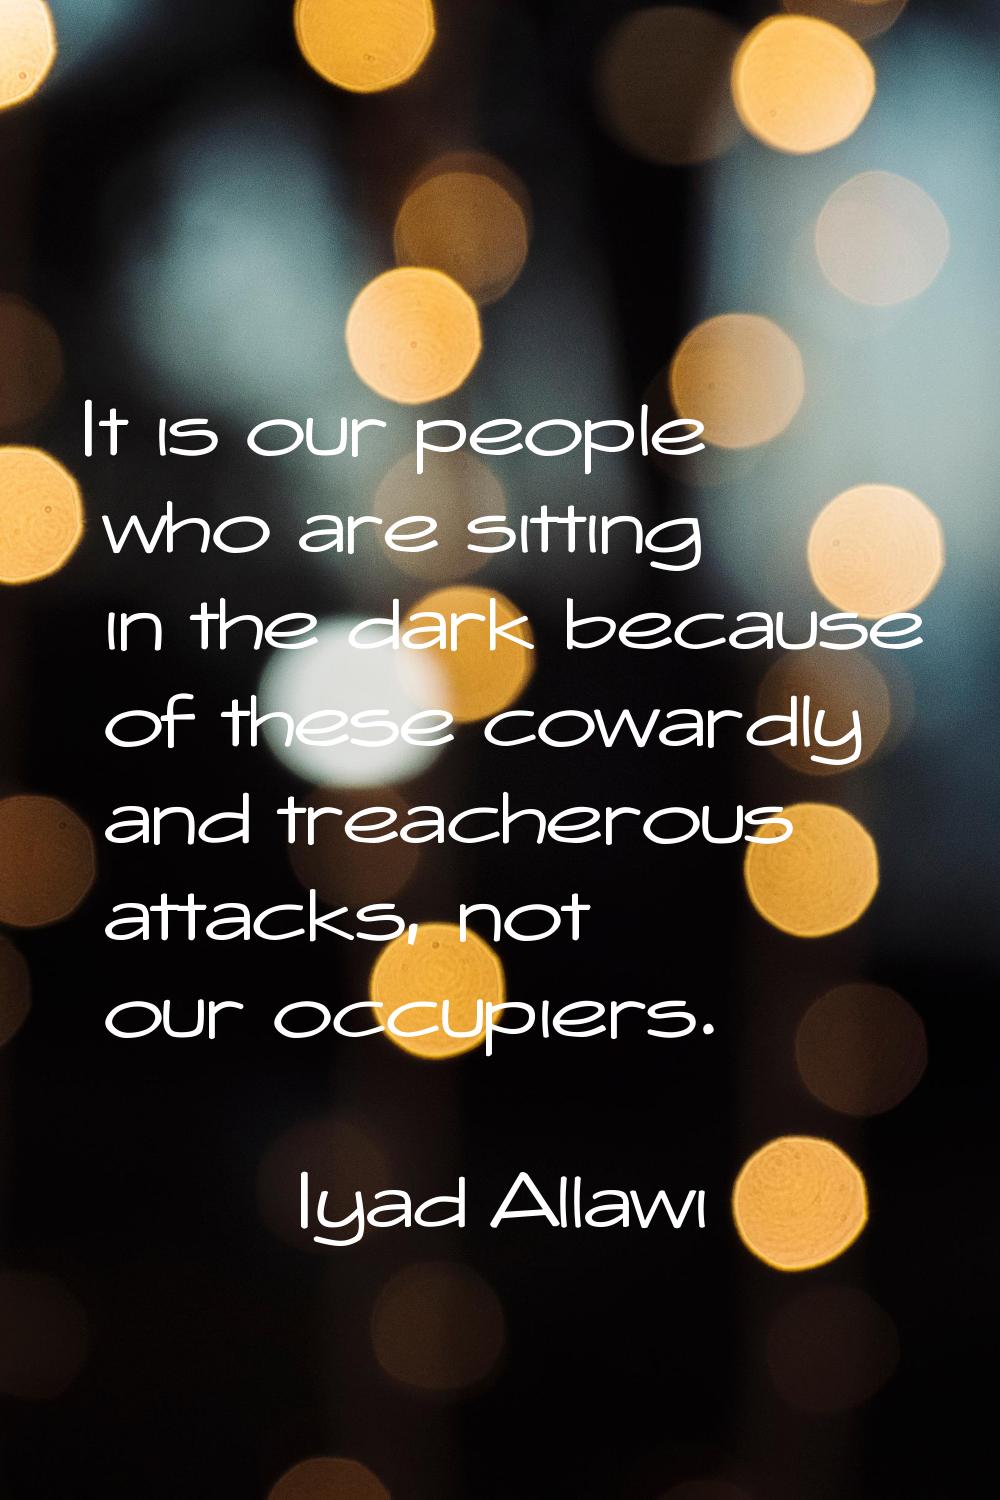 It is our people who are sitting in the dark because of these cowardly and treacherous attacks, not